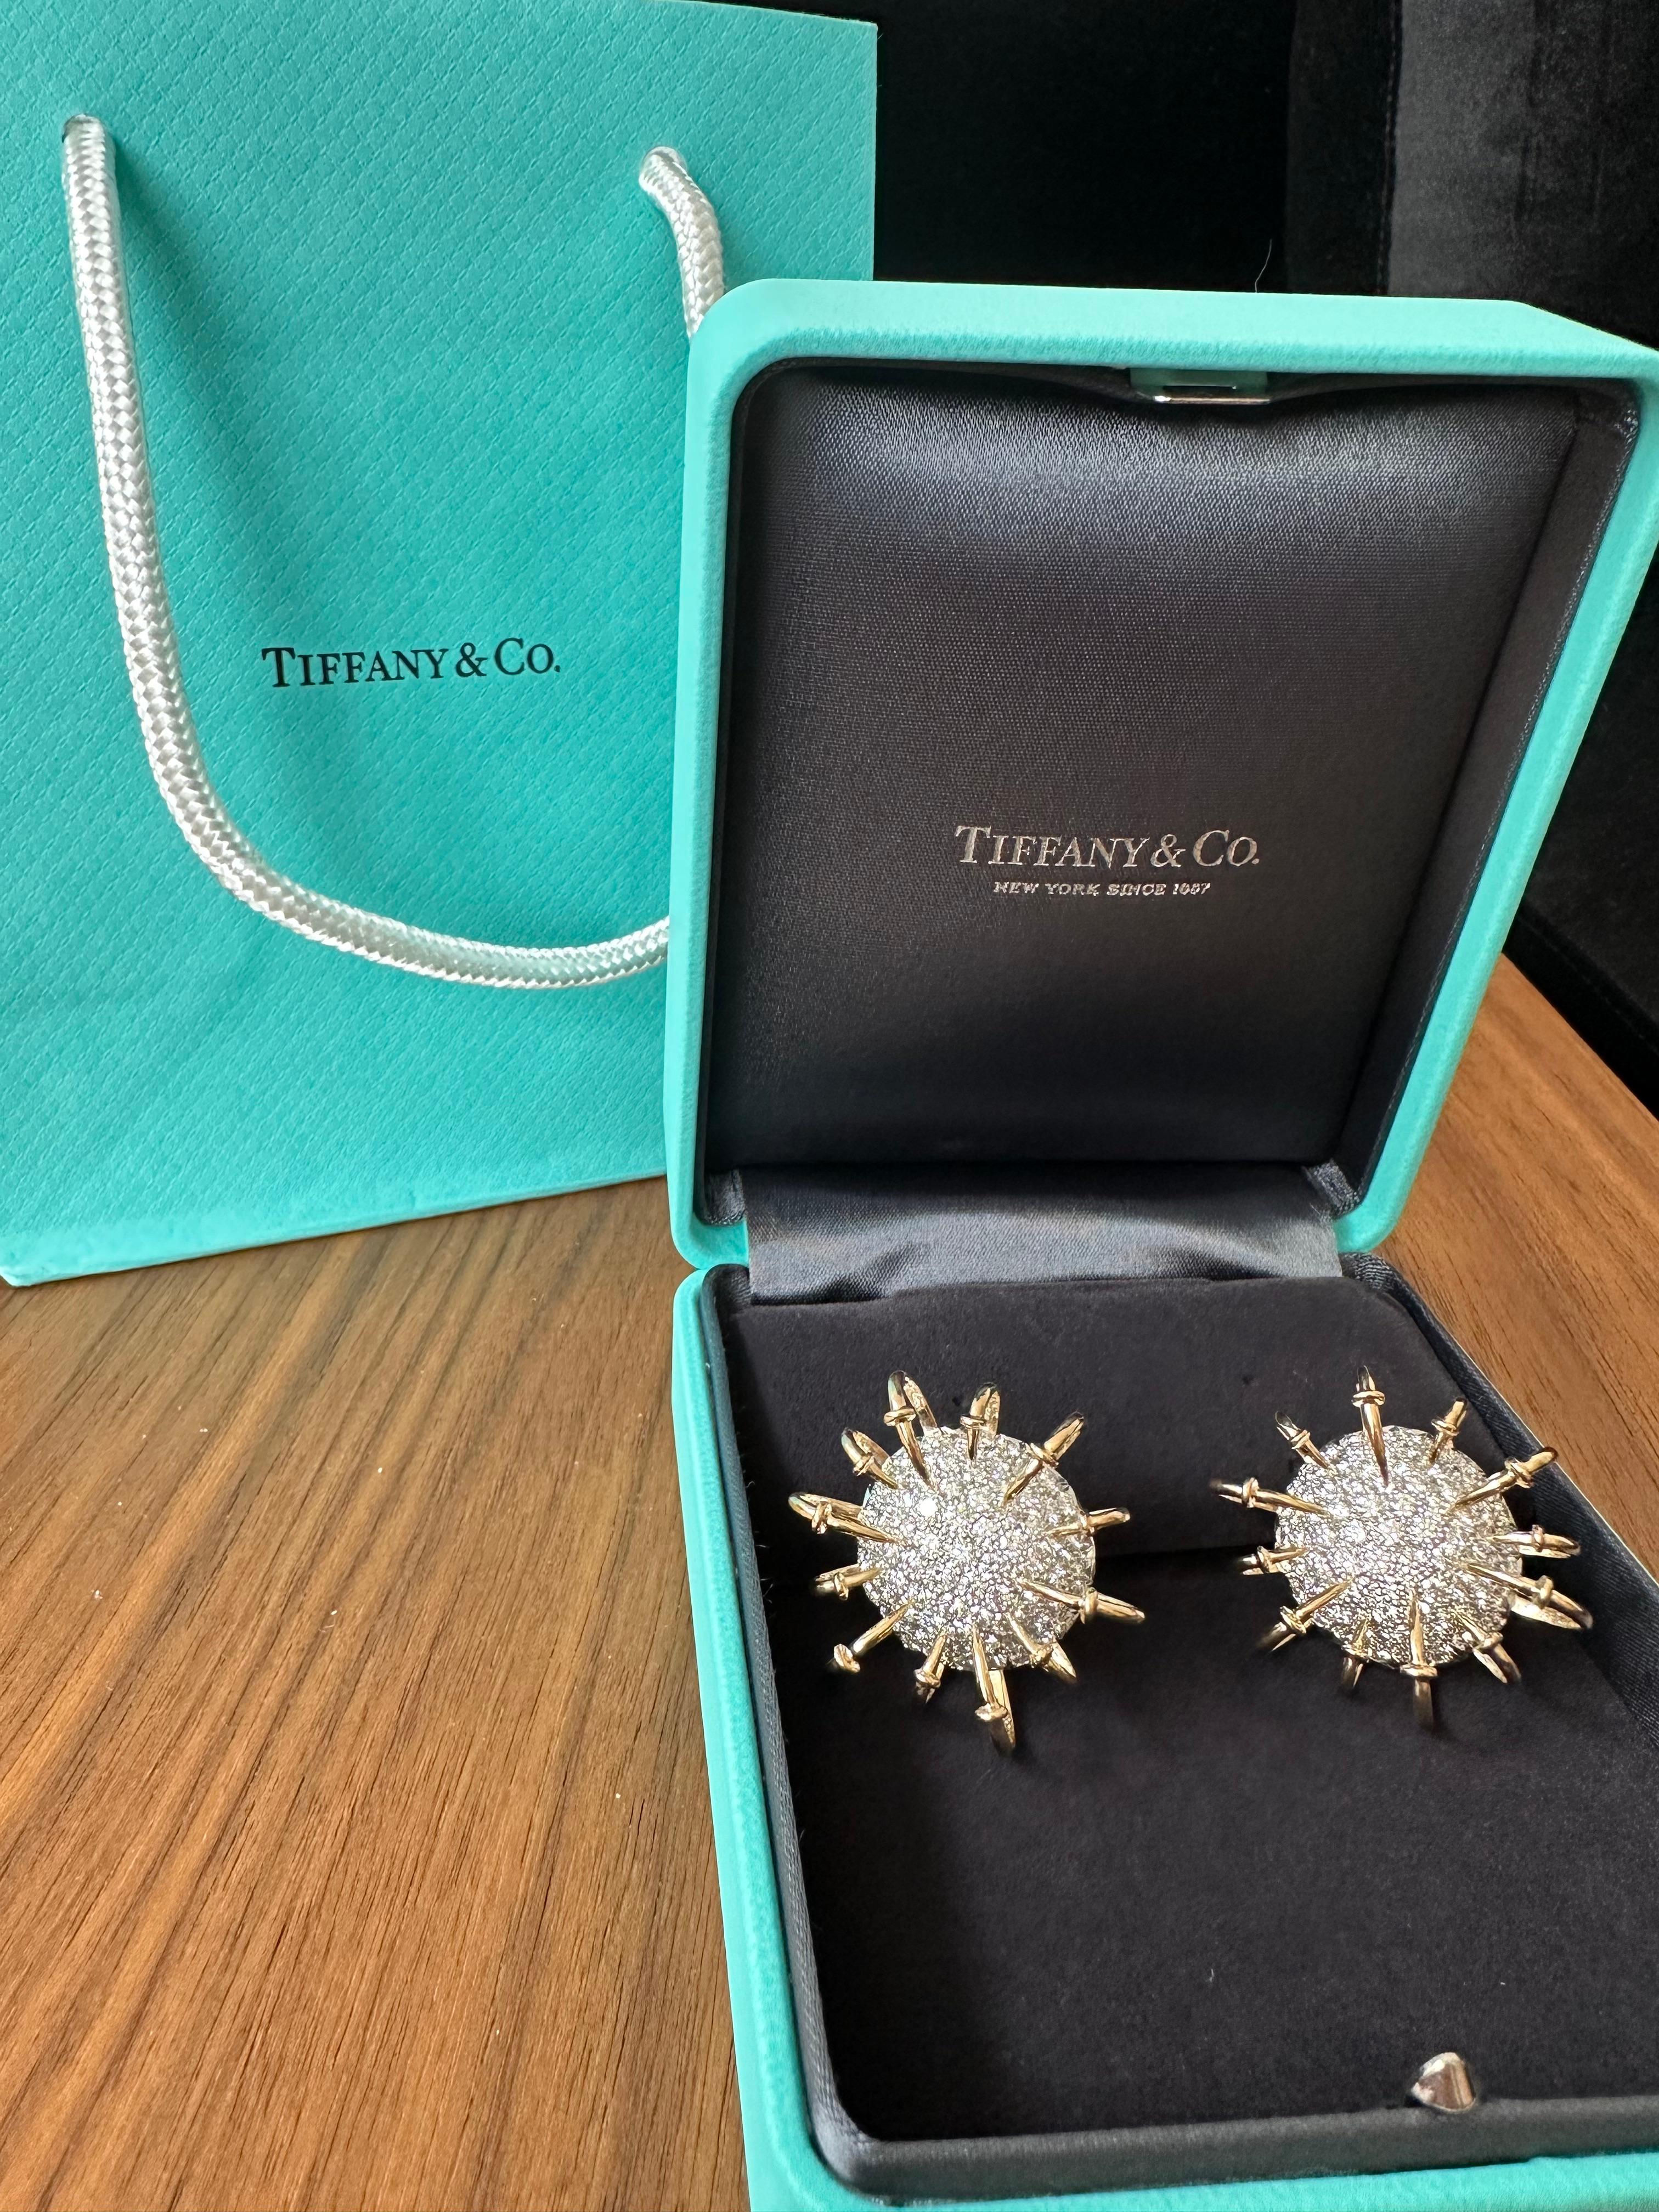 Preowned pair of Jean Schlumberger for Tiffany & Co. earrings from the 'Apollo' collection. Inspired by electrons circling an atom, the circular bombé-style earrings are set with gleaming pavé diamonds (E-F, VS) weighing an estimated 5.69 carats